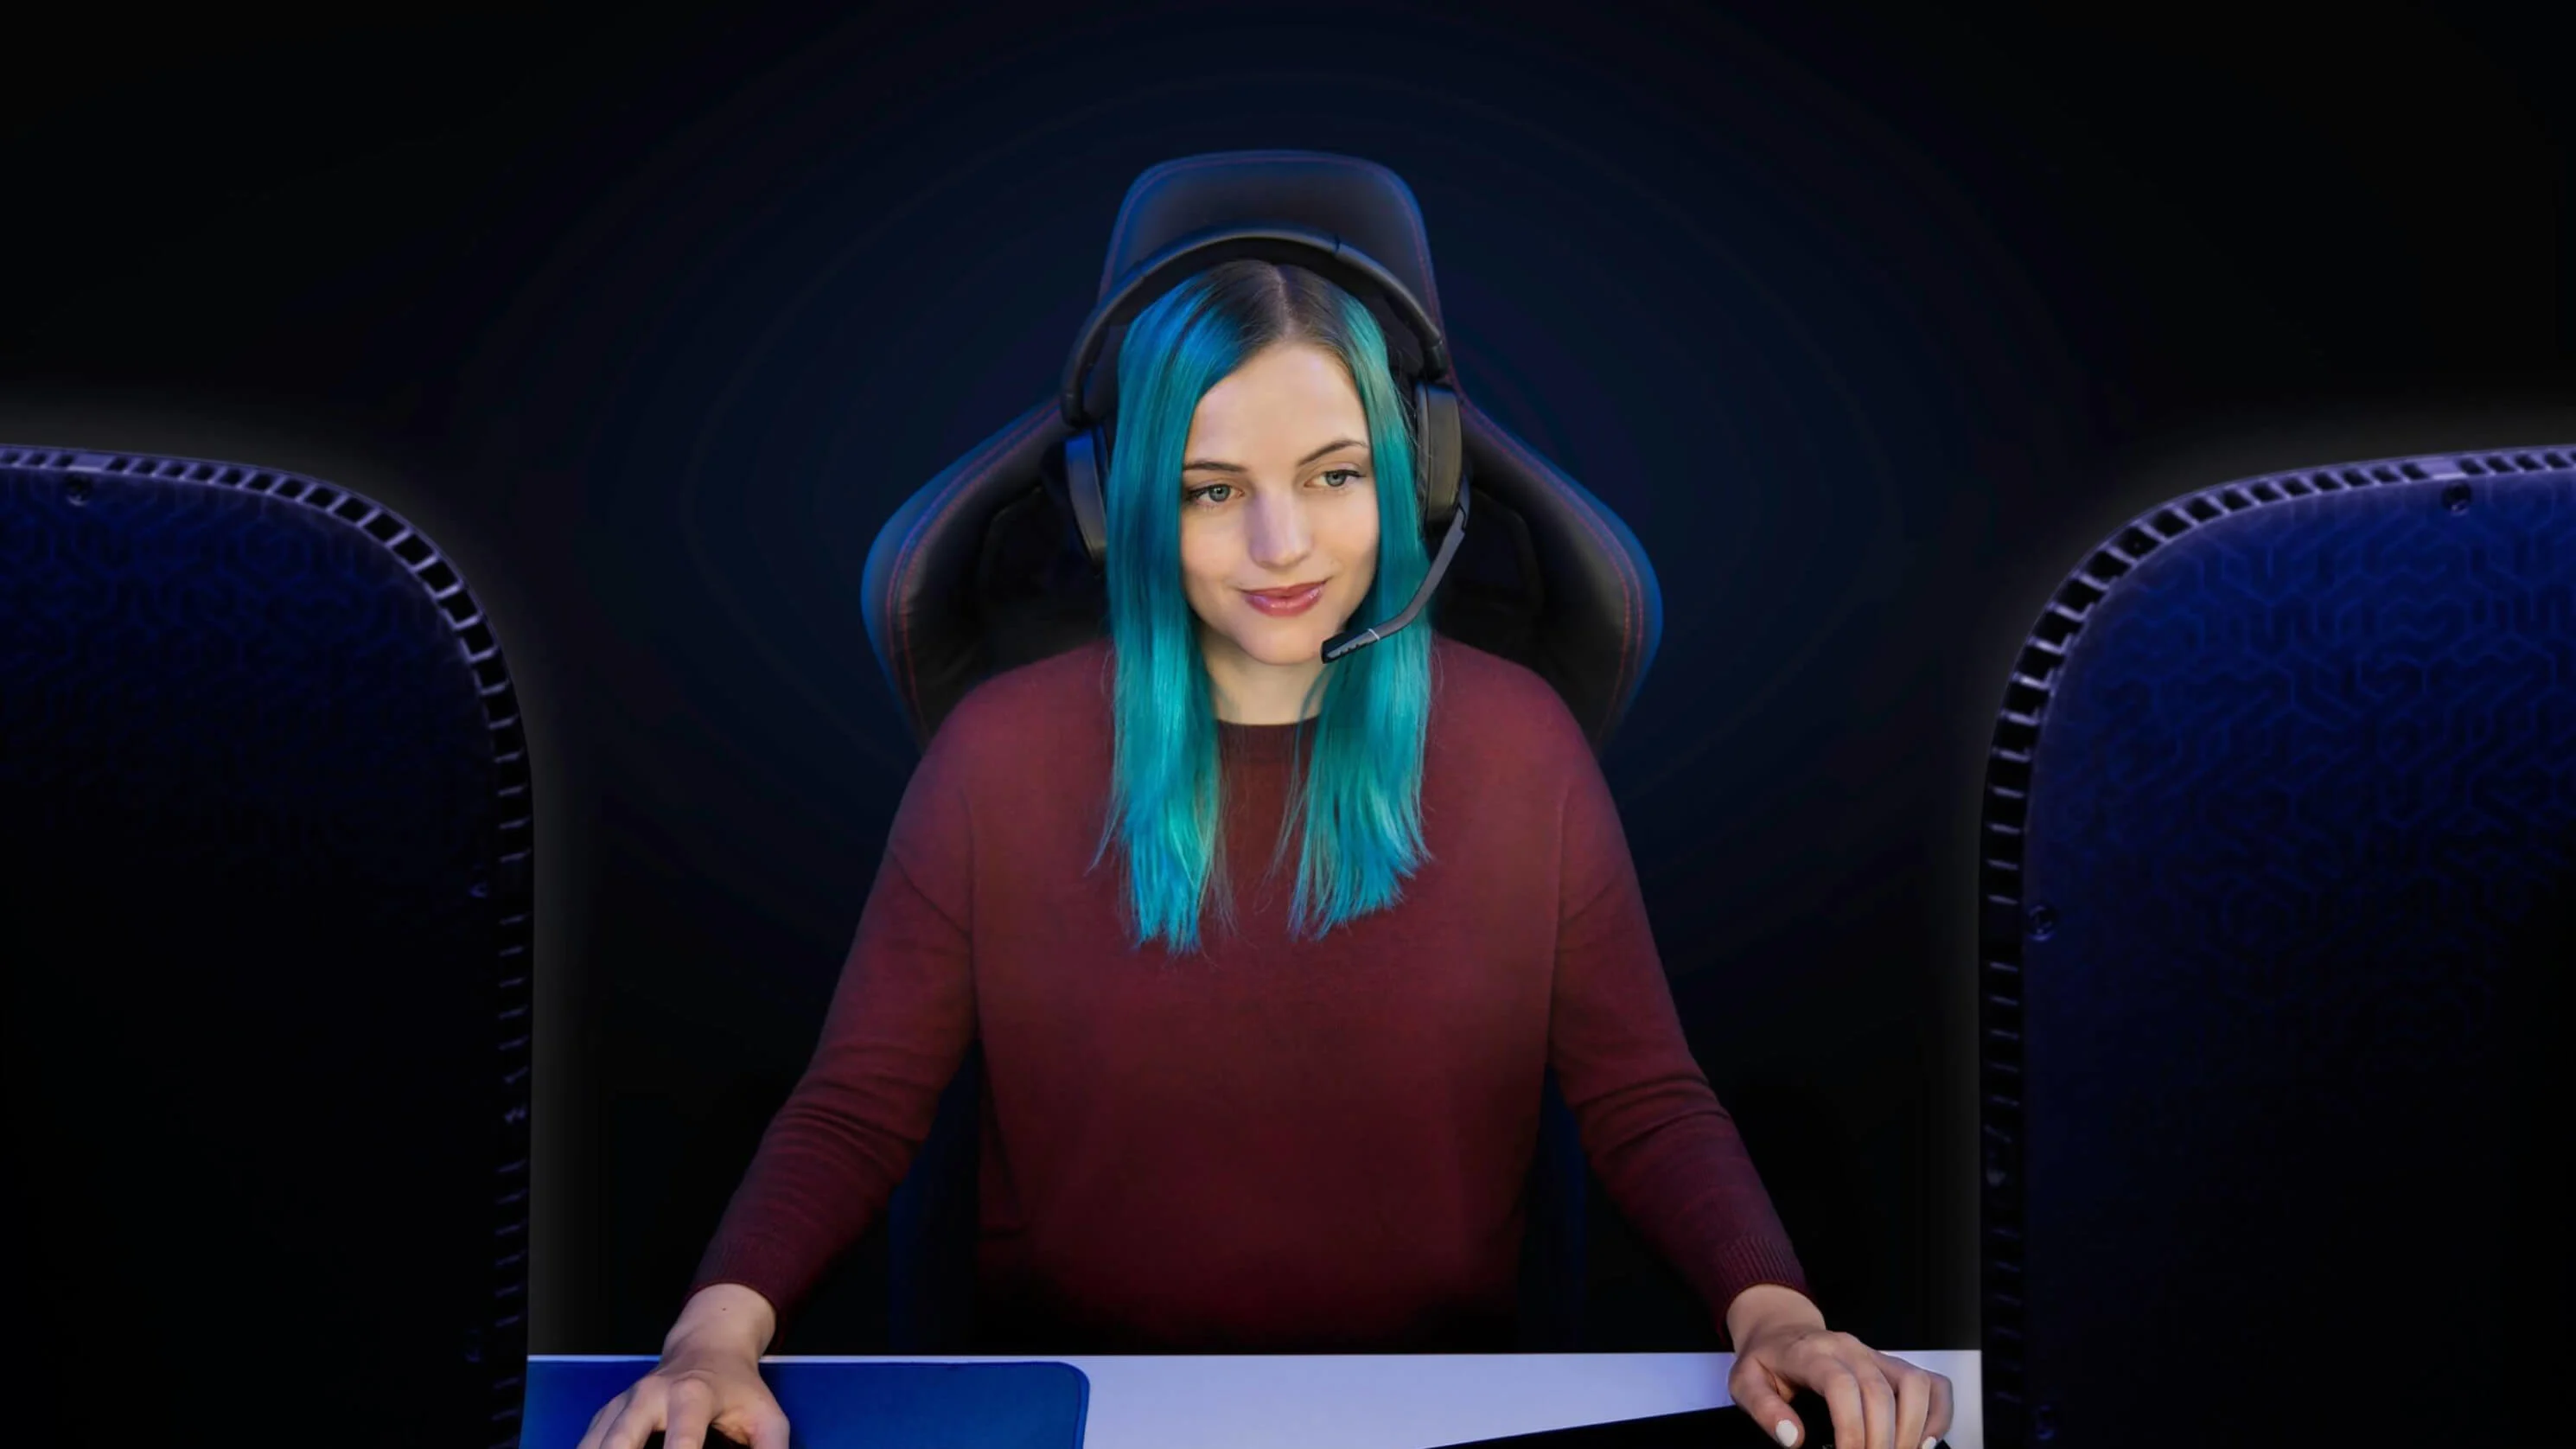 Female streamer seated in front of two Key Lights